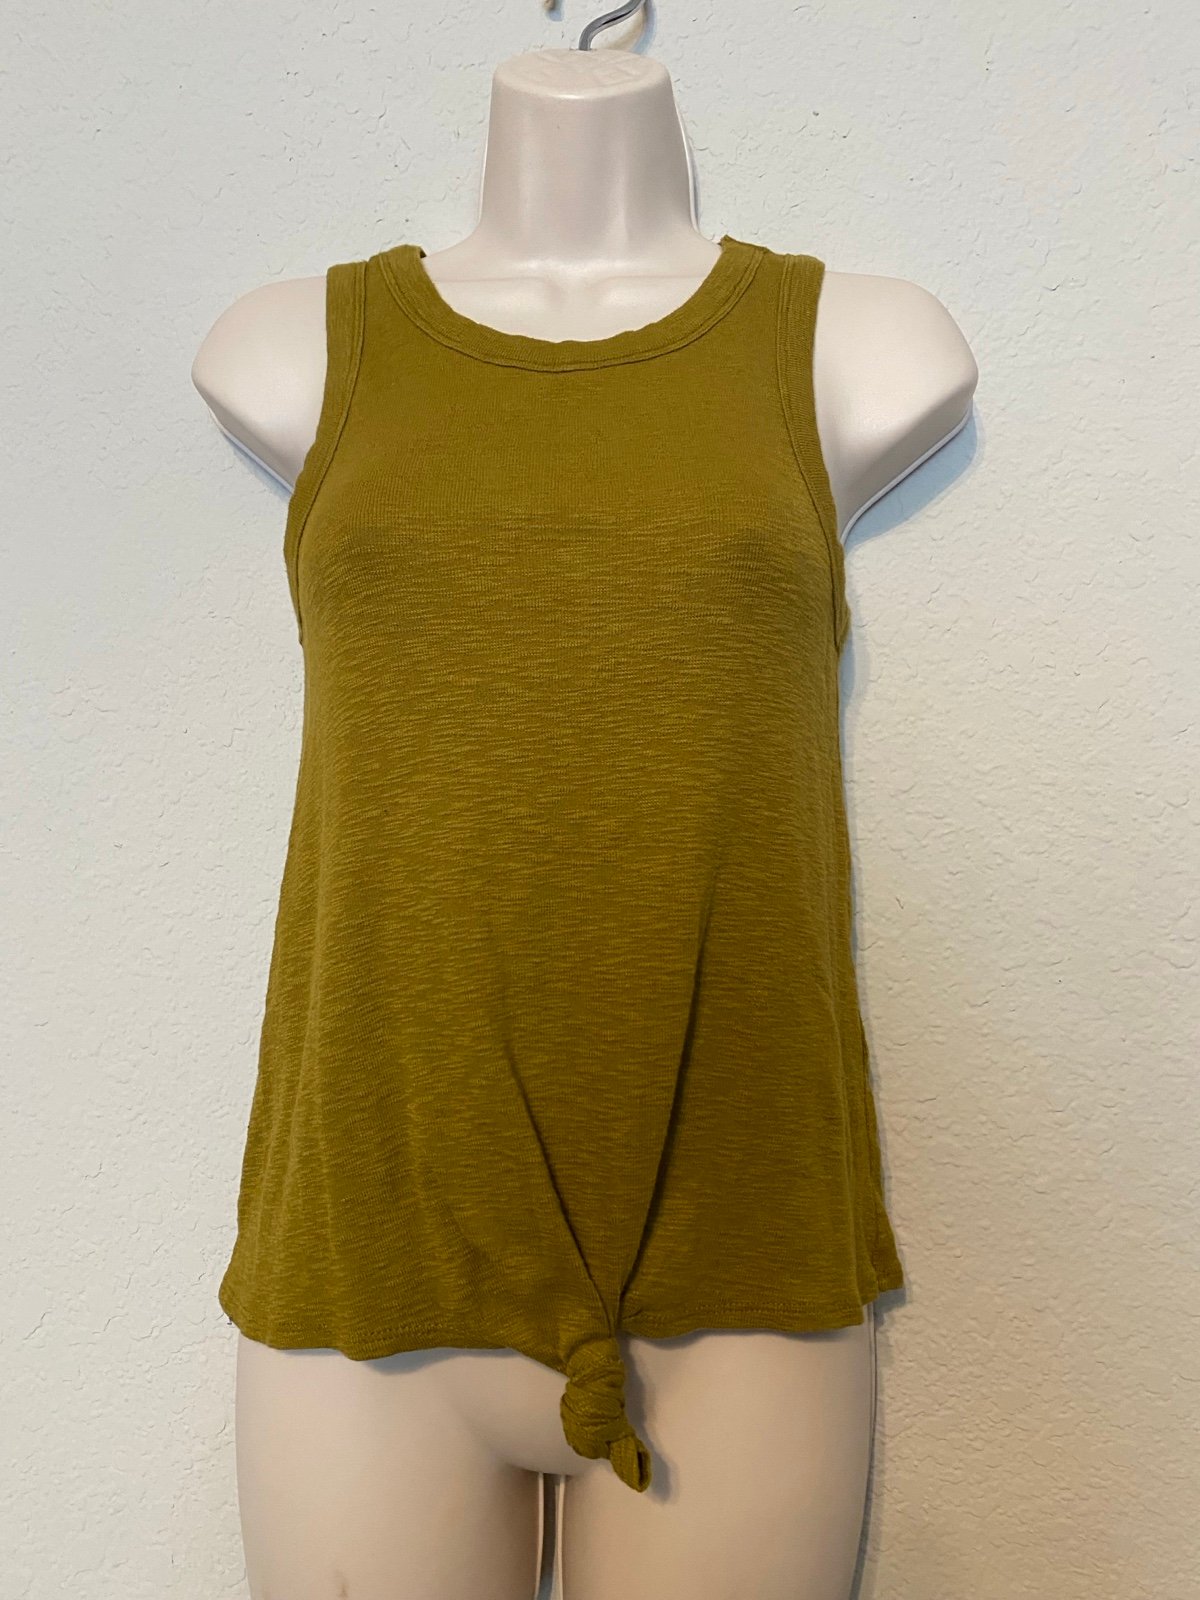 cheapest place to buy  Madewell mustard Tank Top GrBxFI